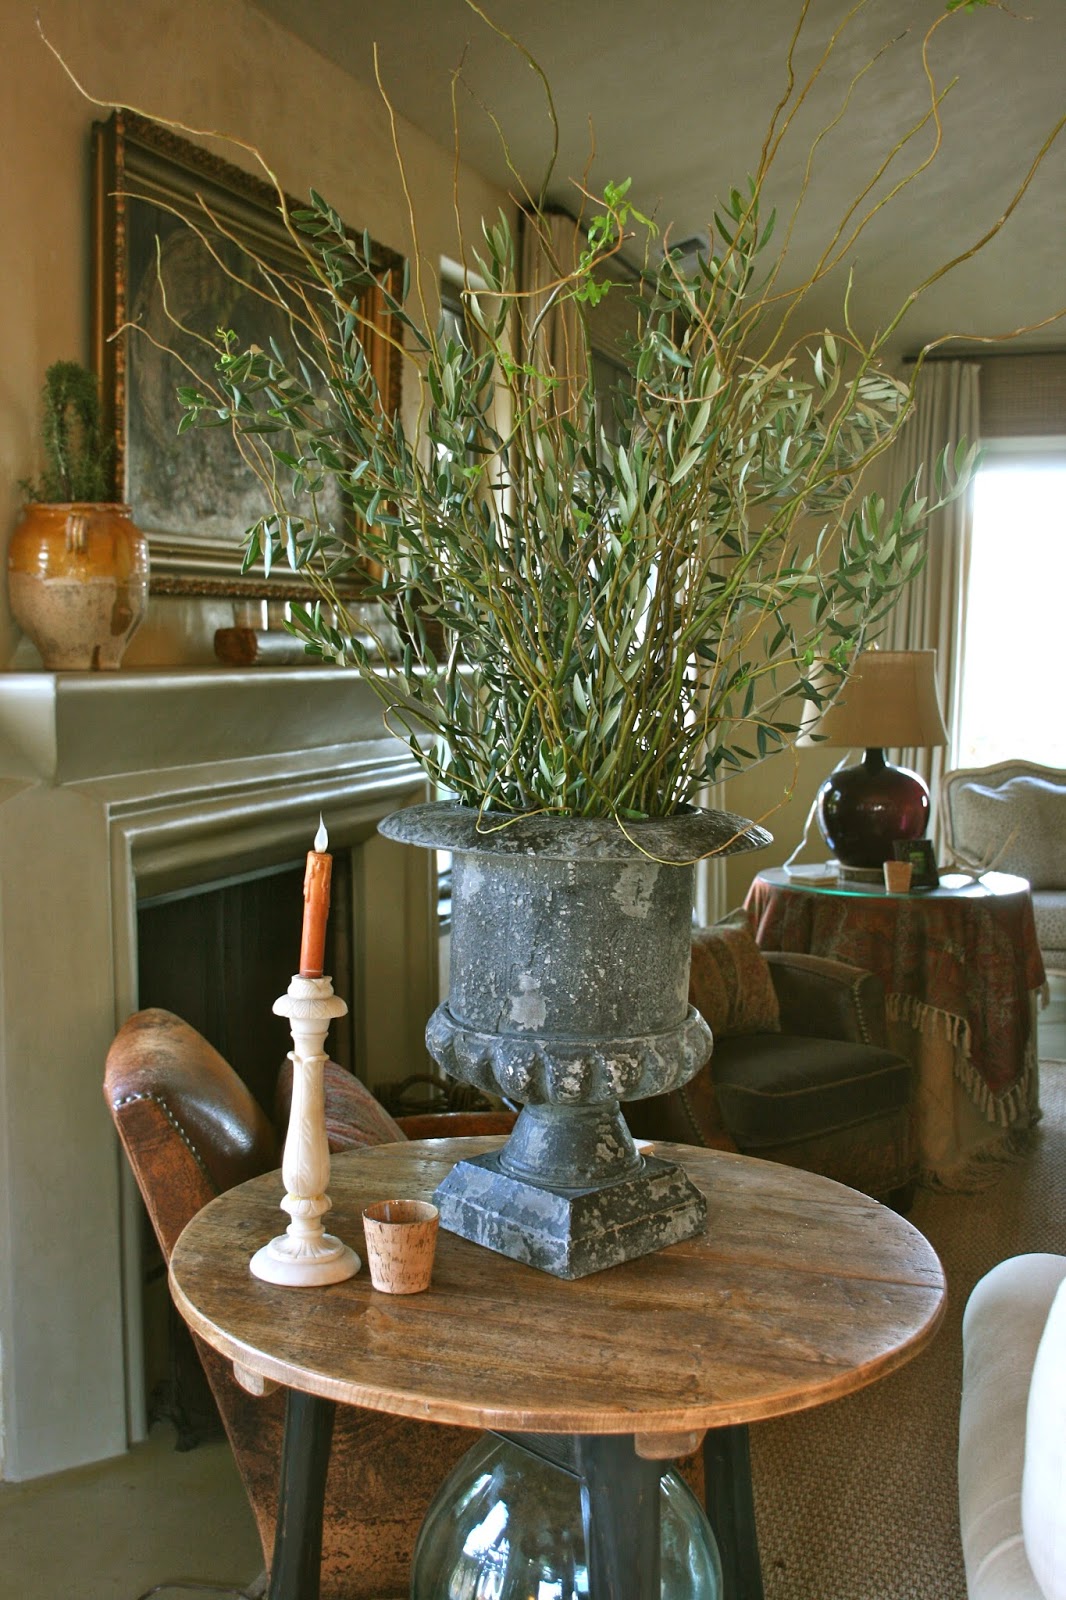 vignette design: Curly Willow Branches